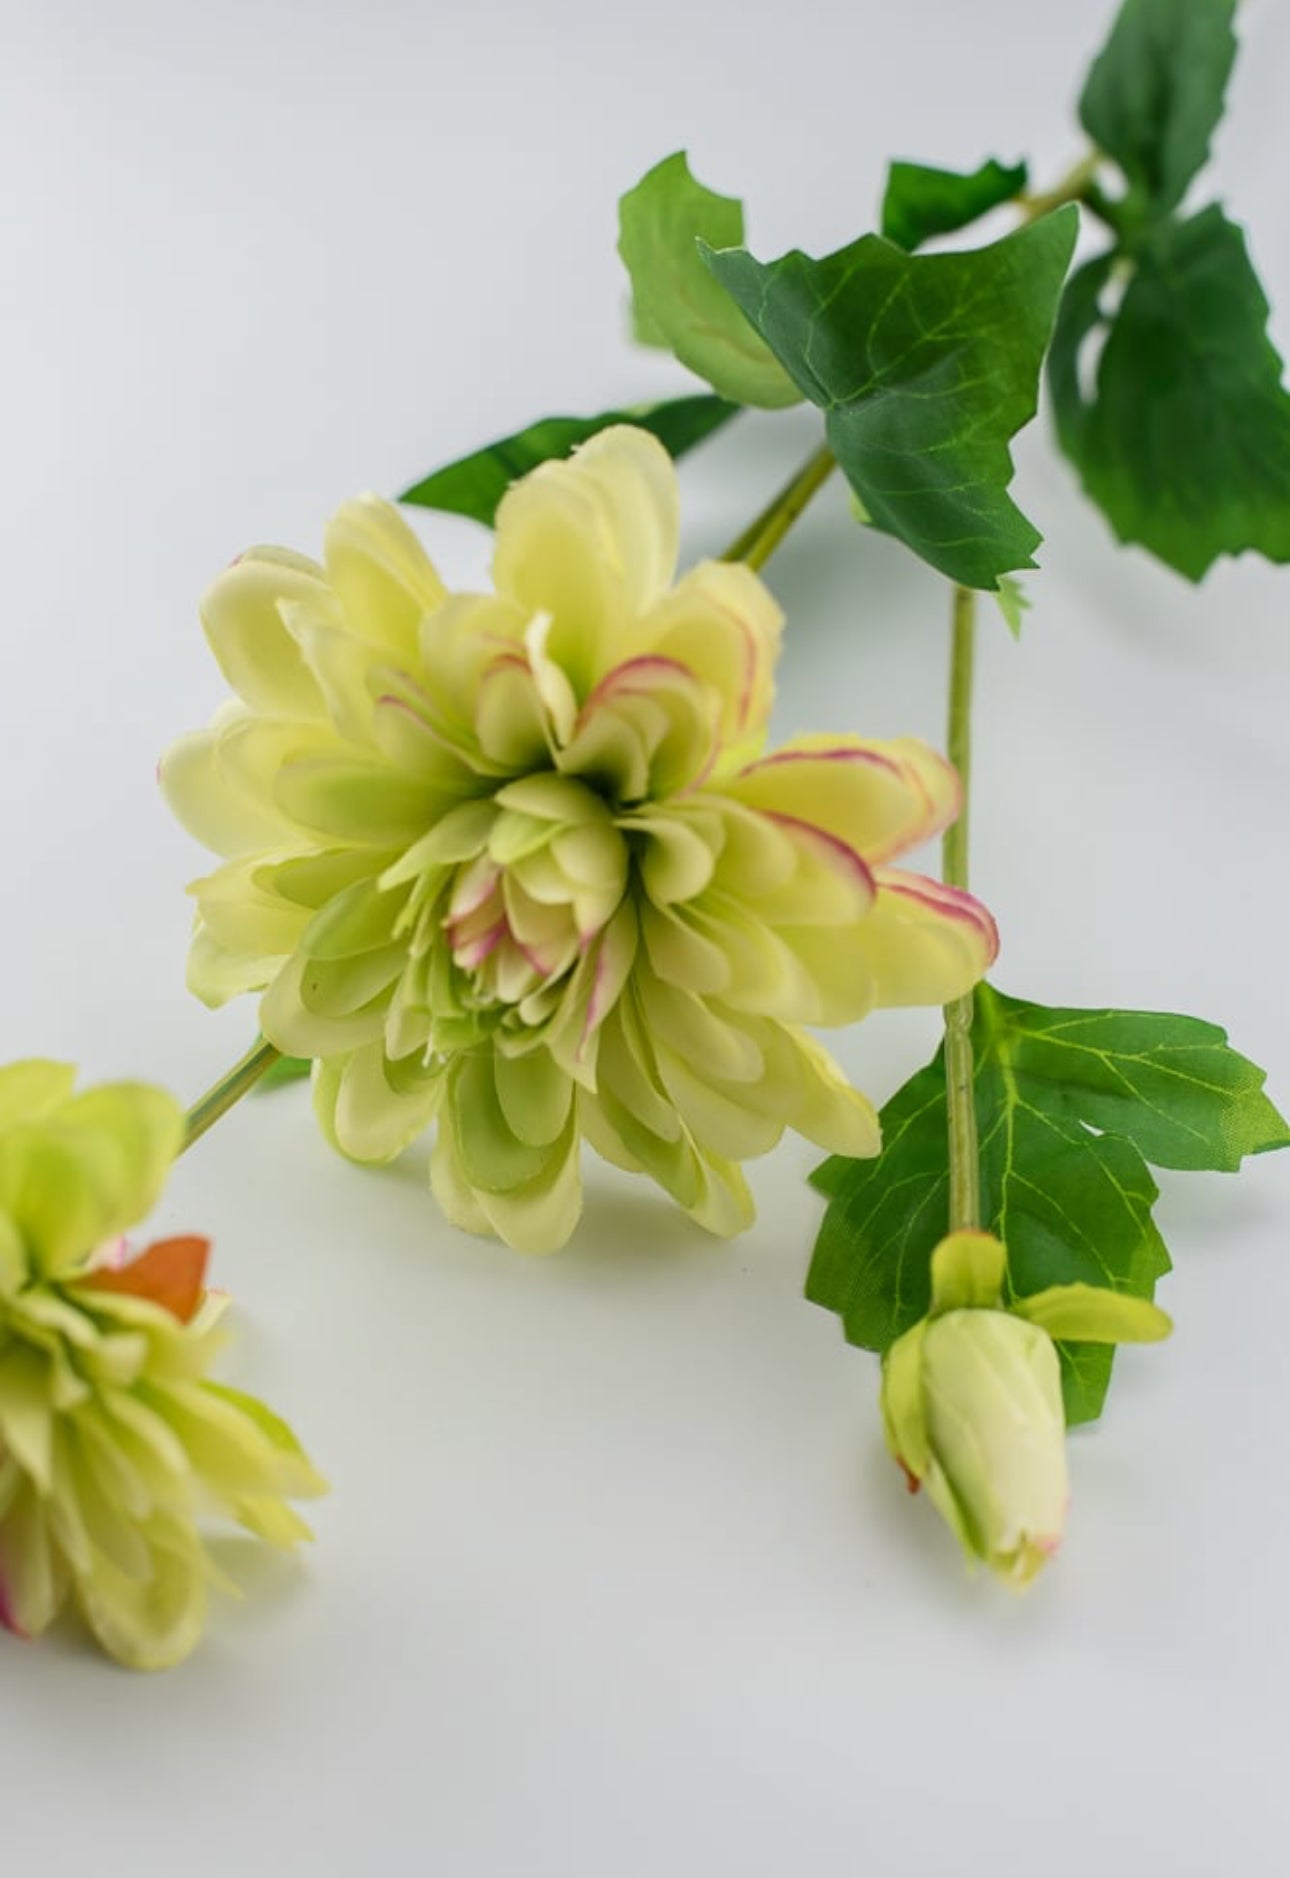 dahlia green and pink - Greenery Market6188-G